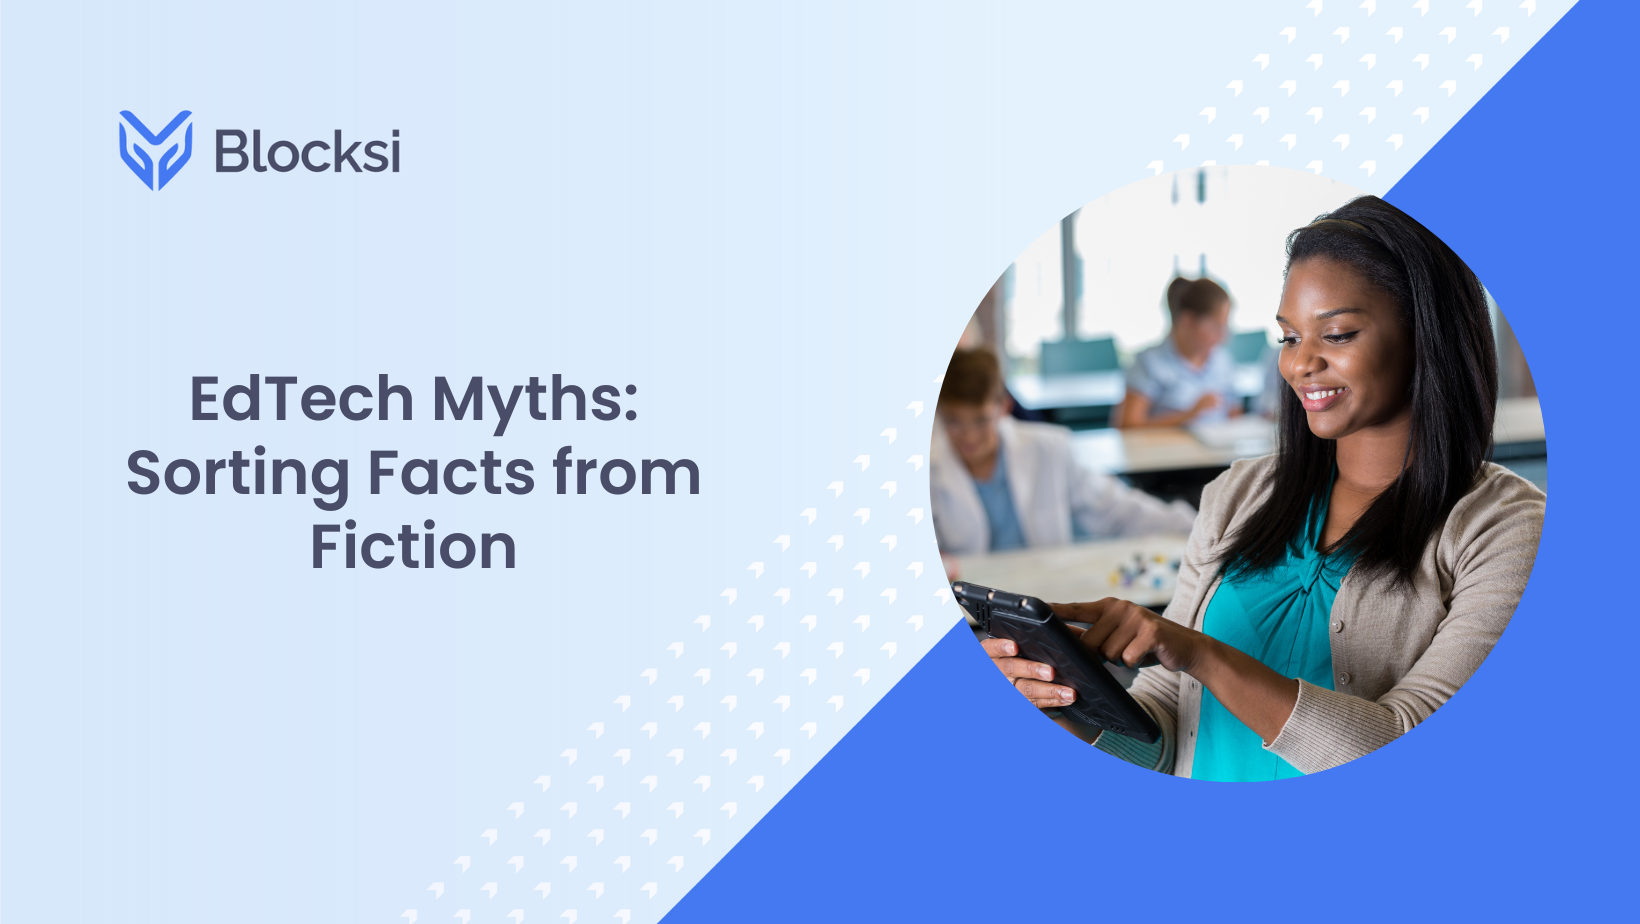 EdTech Myths: Sorting Facts from Fiction